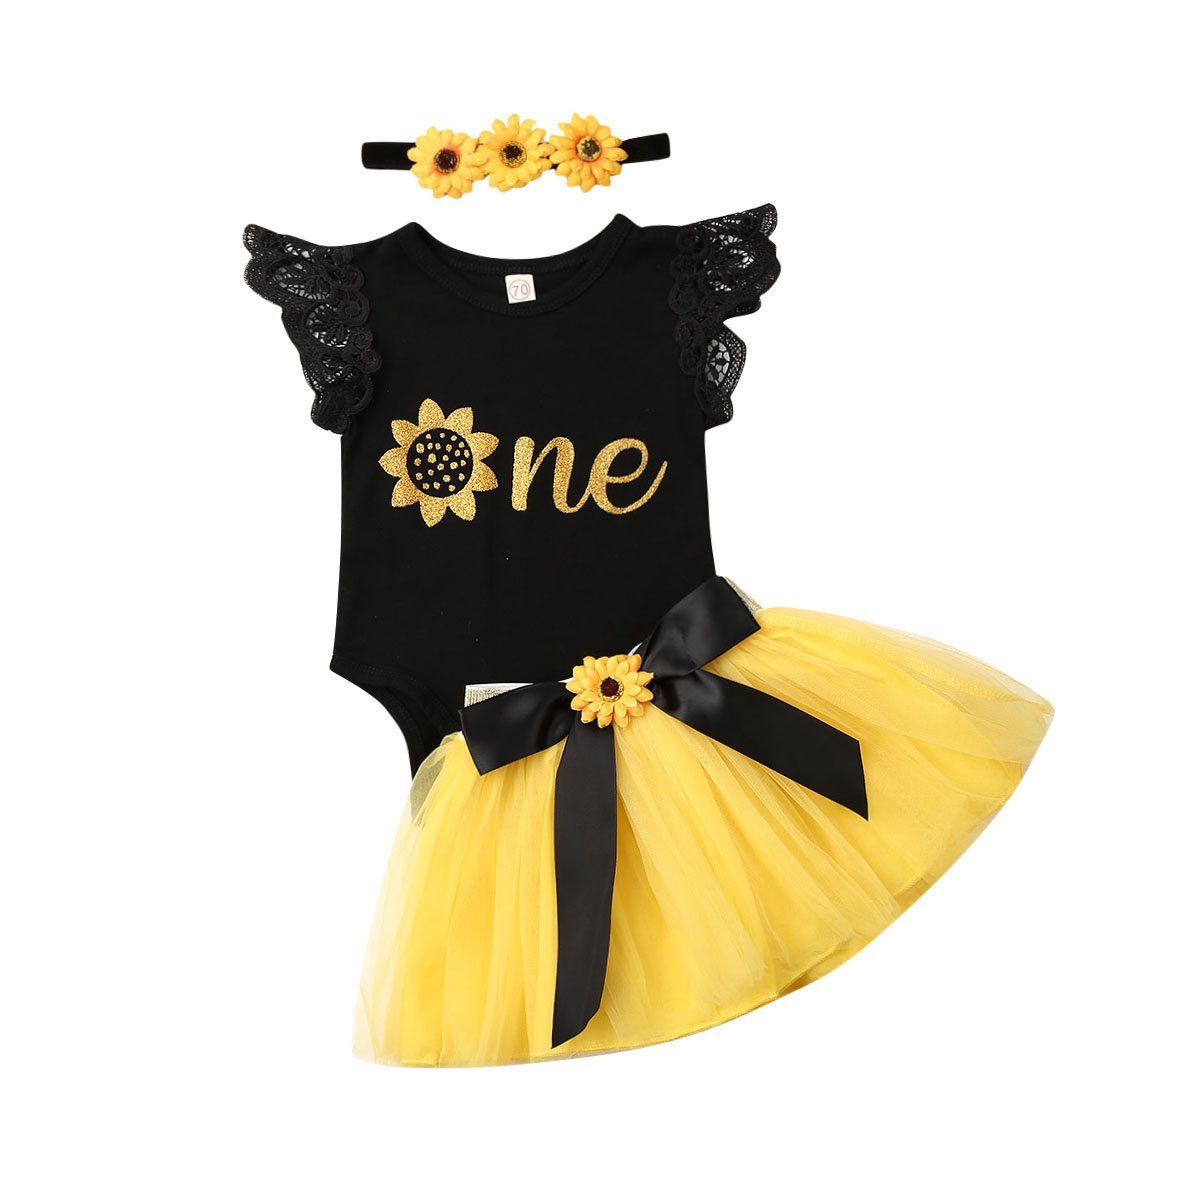 Infant Toddler Baby Girl Outfits 1st Birthday Romper One Top Bow Knot Tutu Skirt 2PCS Summer Clothes 